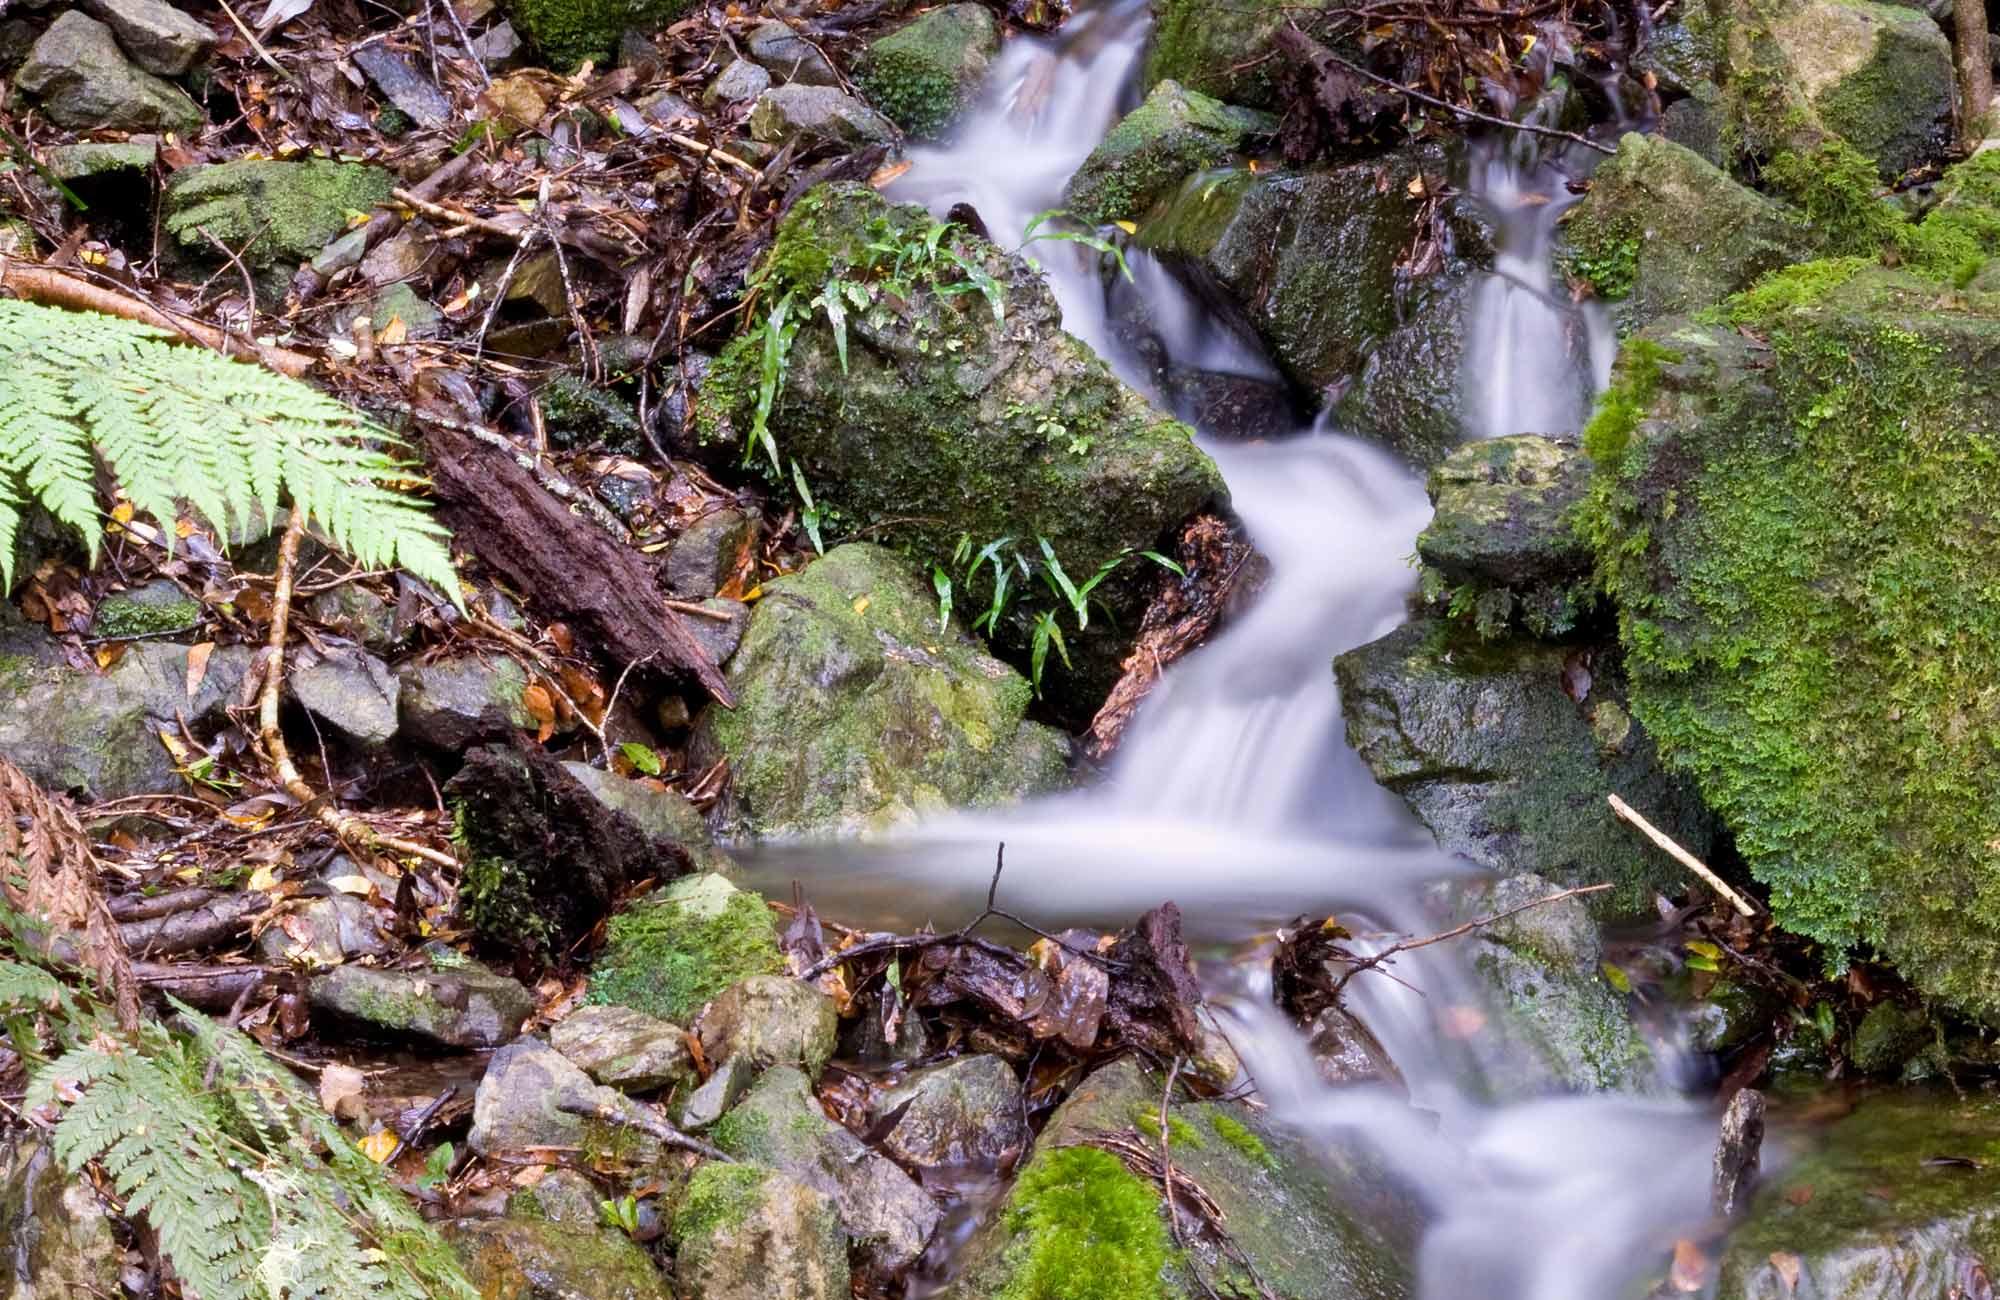 Water stream over moss-covered rocks, Mount Hyland Nature reserve. Photo: M Price